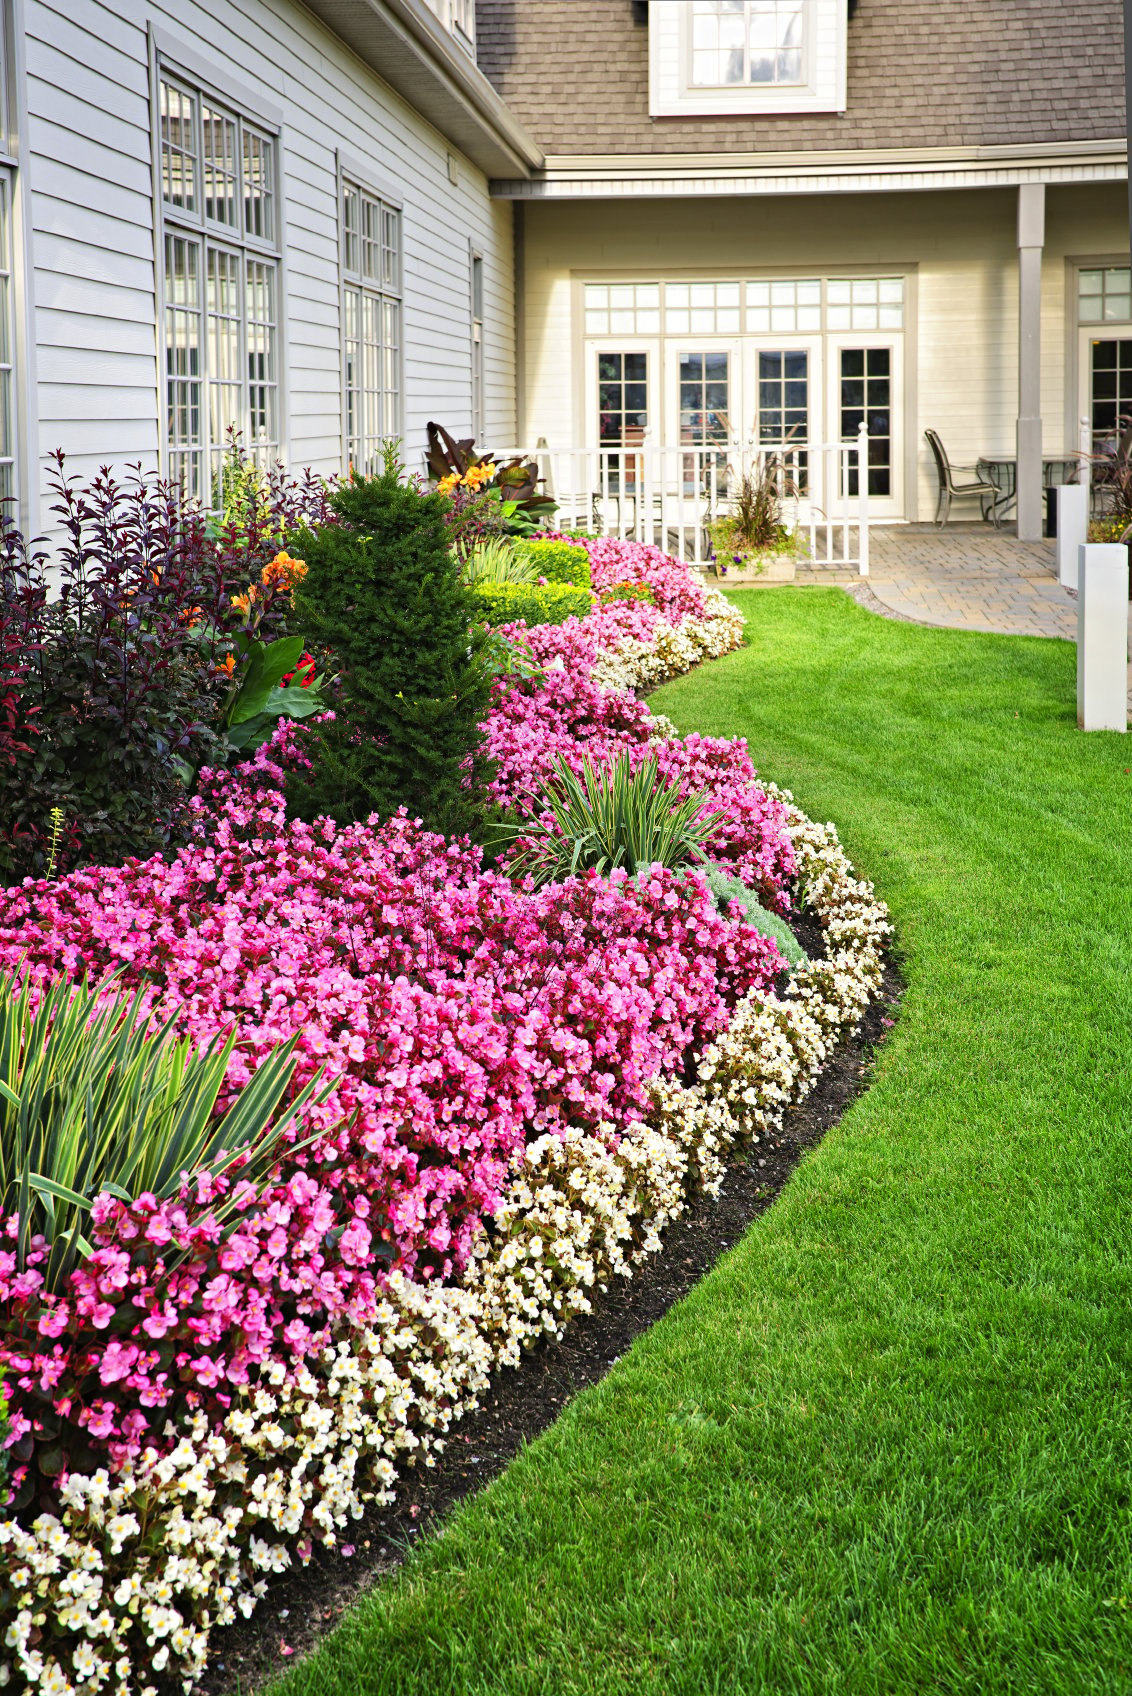 10 Inspirational Residential Landscaping Ideas To Make ...